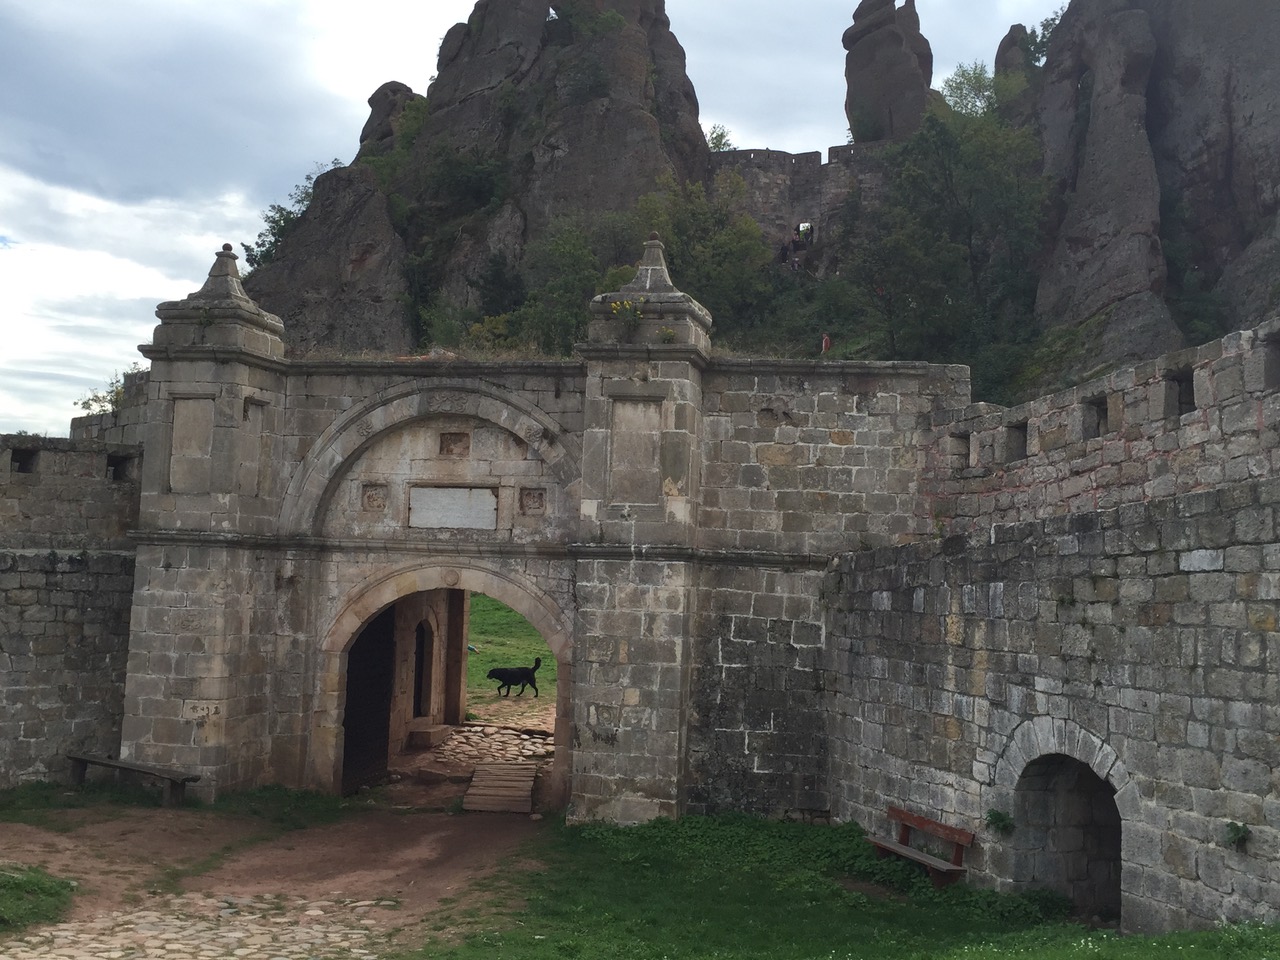 Gate to Belogradchik Fortress with imposing rock formations behind